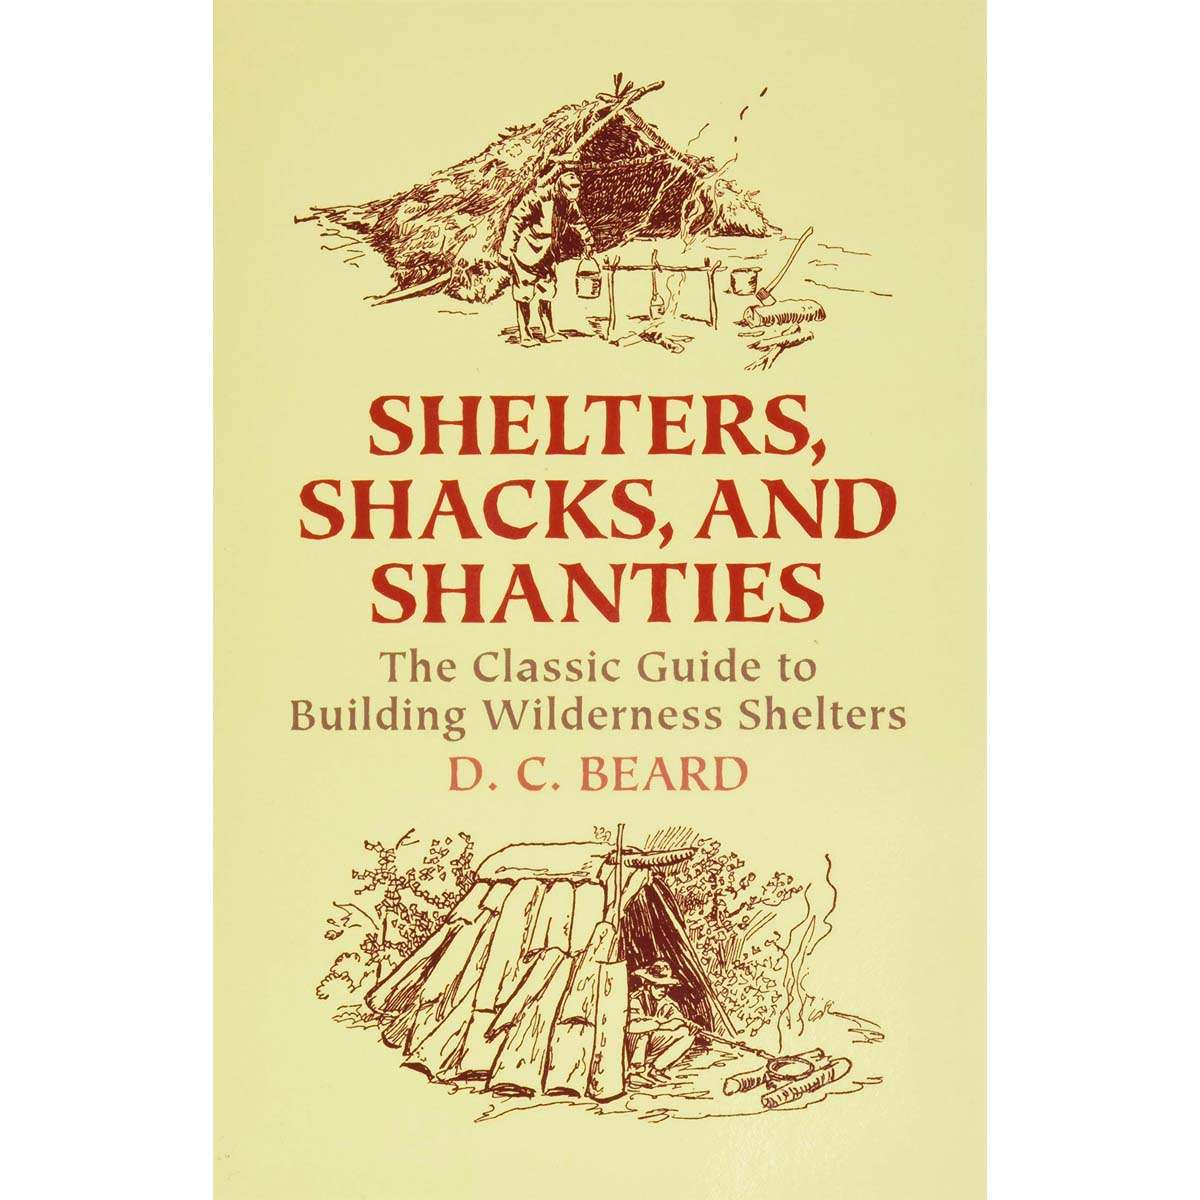 Shelters, Shacks, and Shanties Book: The Classic Guide to Building Wilderness Shelters